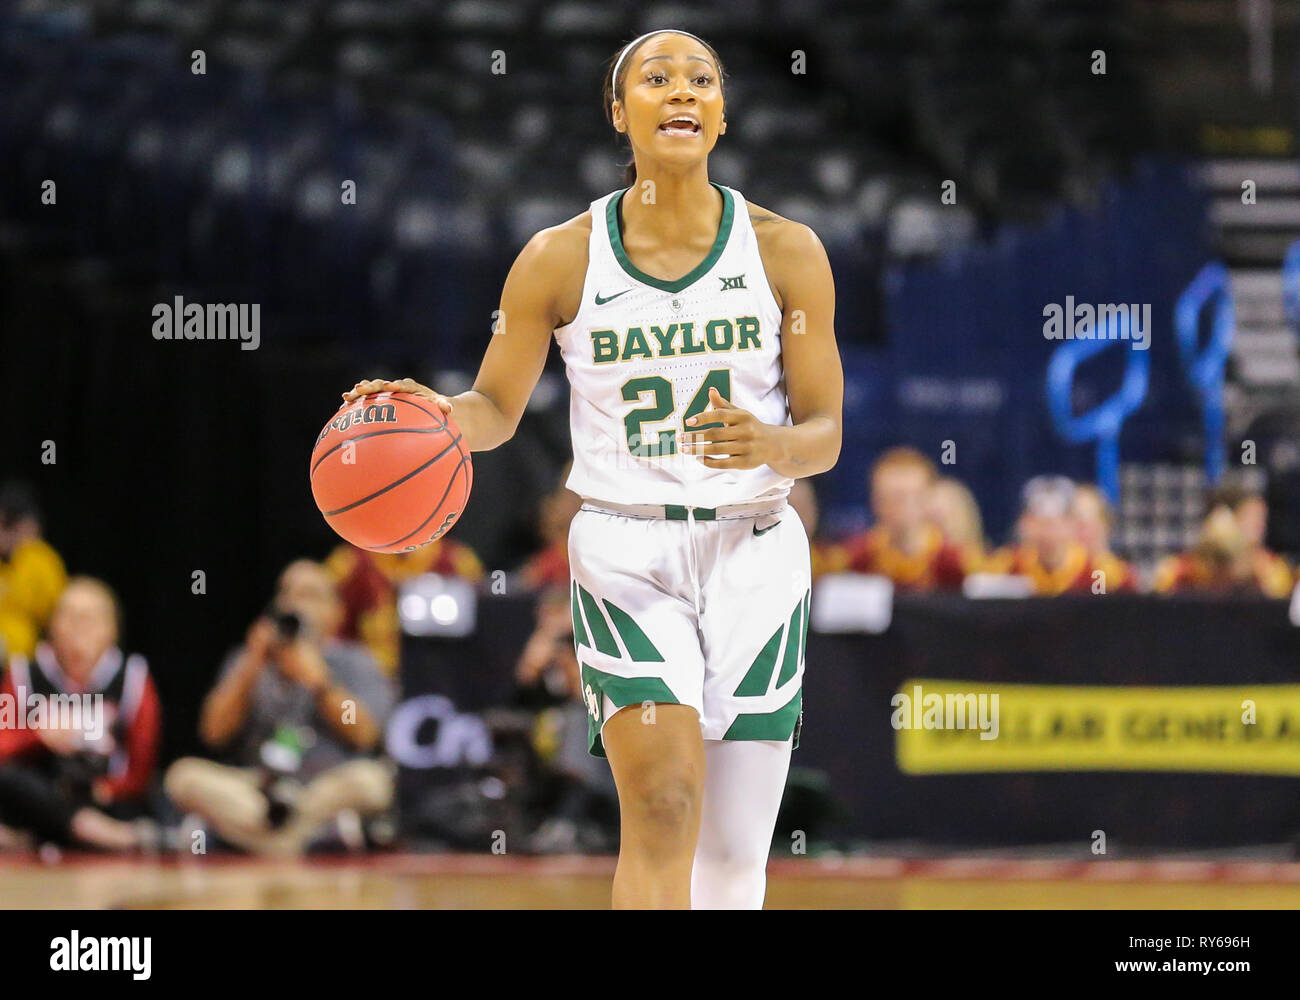 Oklahoma City, OK, USA. 11th Mar, 2019. Baylor Guard Chloe Jackson (24) dribbles the ball up the court during the Phillips 66 Big 12 Womens Basketball Championship Final game between the Baylor Lady Bears and the Iowa State Cyclones at Chesapeake Energy Arena in Oklahoma City, OK. Gray Siegel/CSM/Alamy Live News Stock Photo